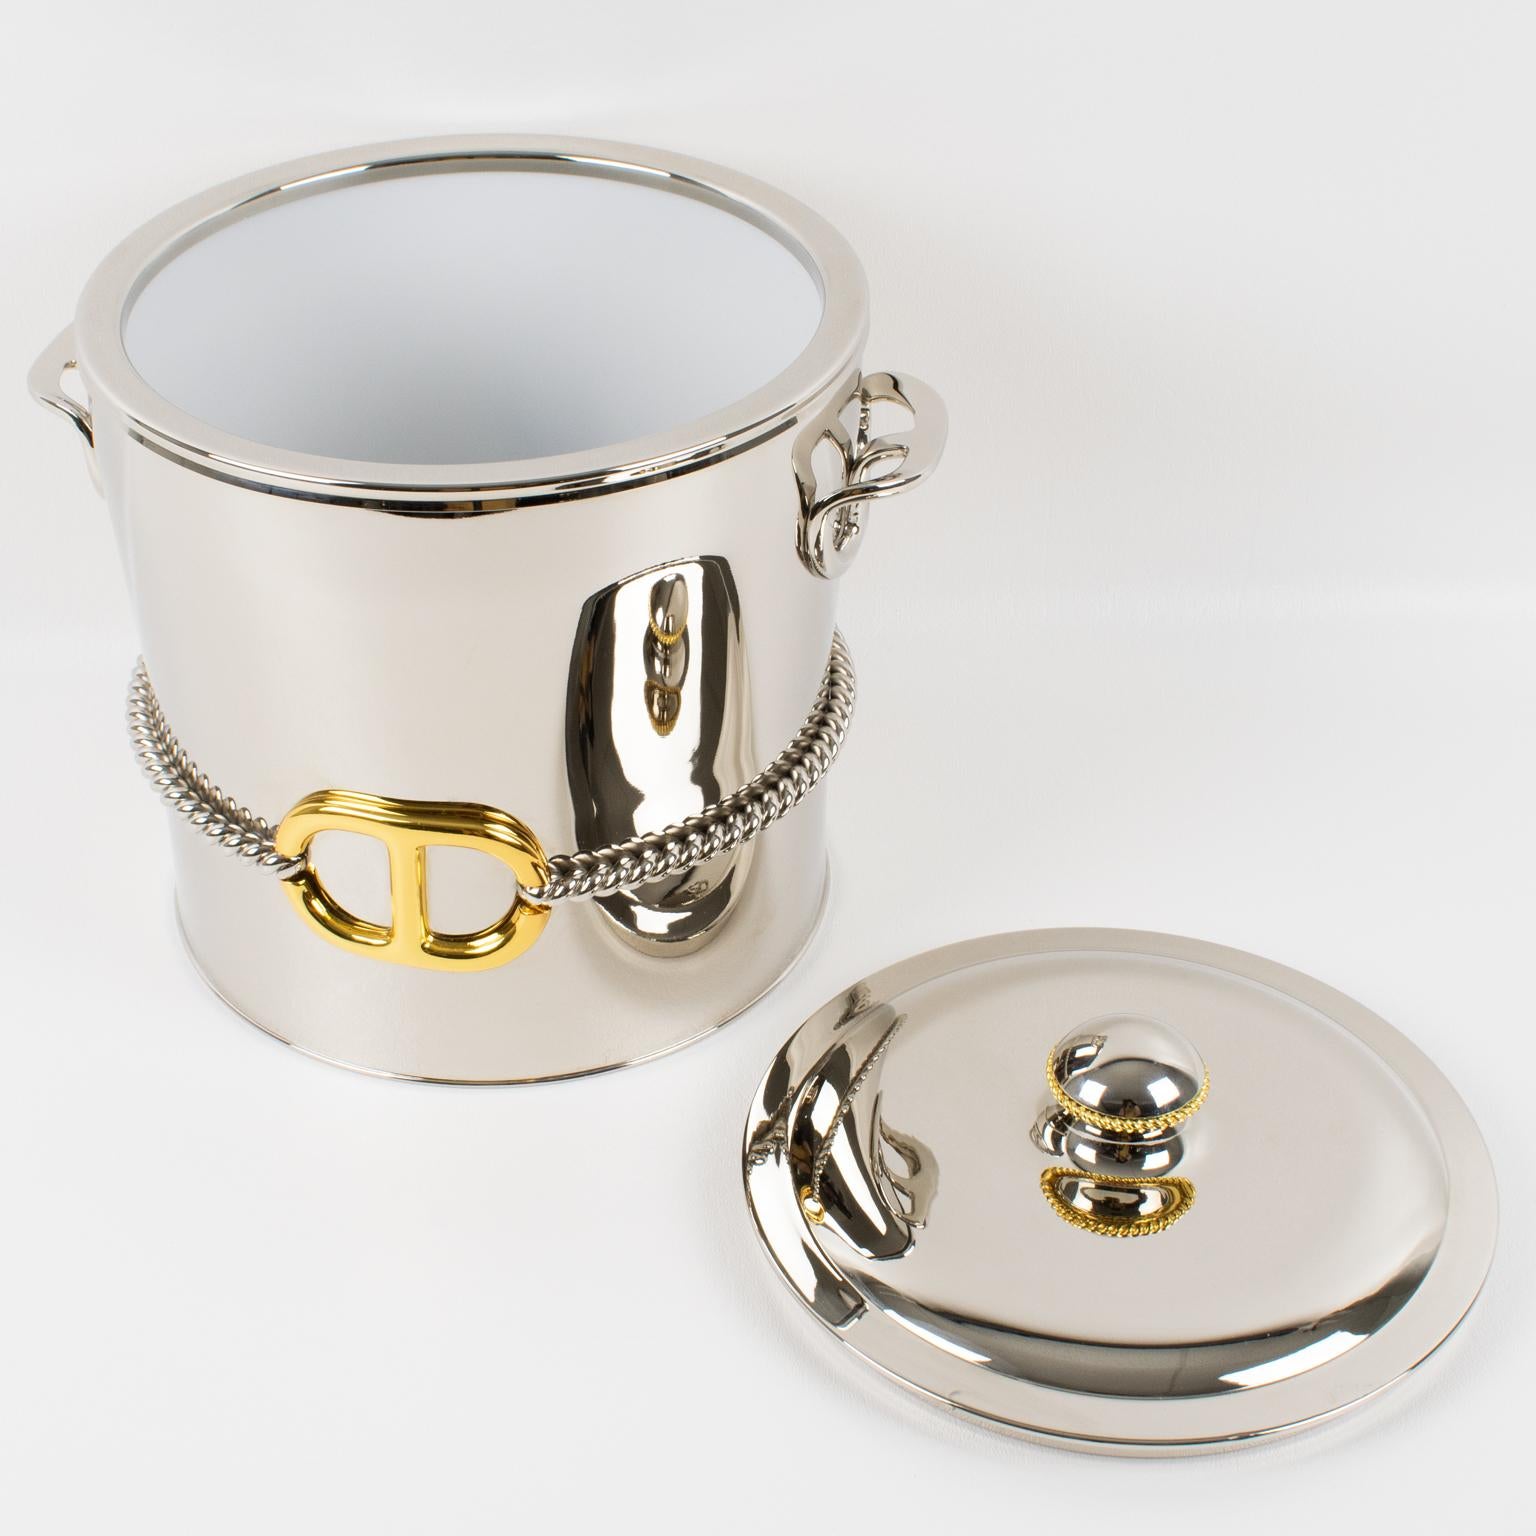 Late 20th Century Gucci Italy Silvered and Gold Plated Metal Barware Ice Bucket For Sale